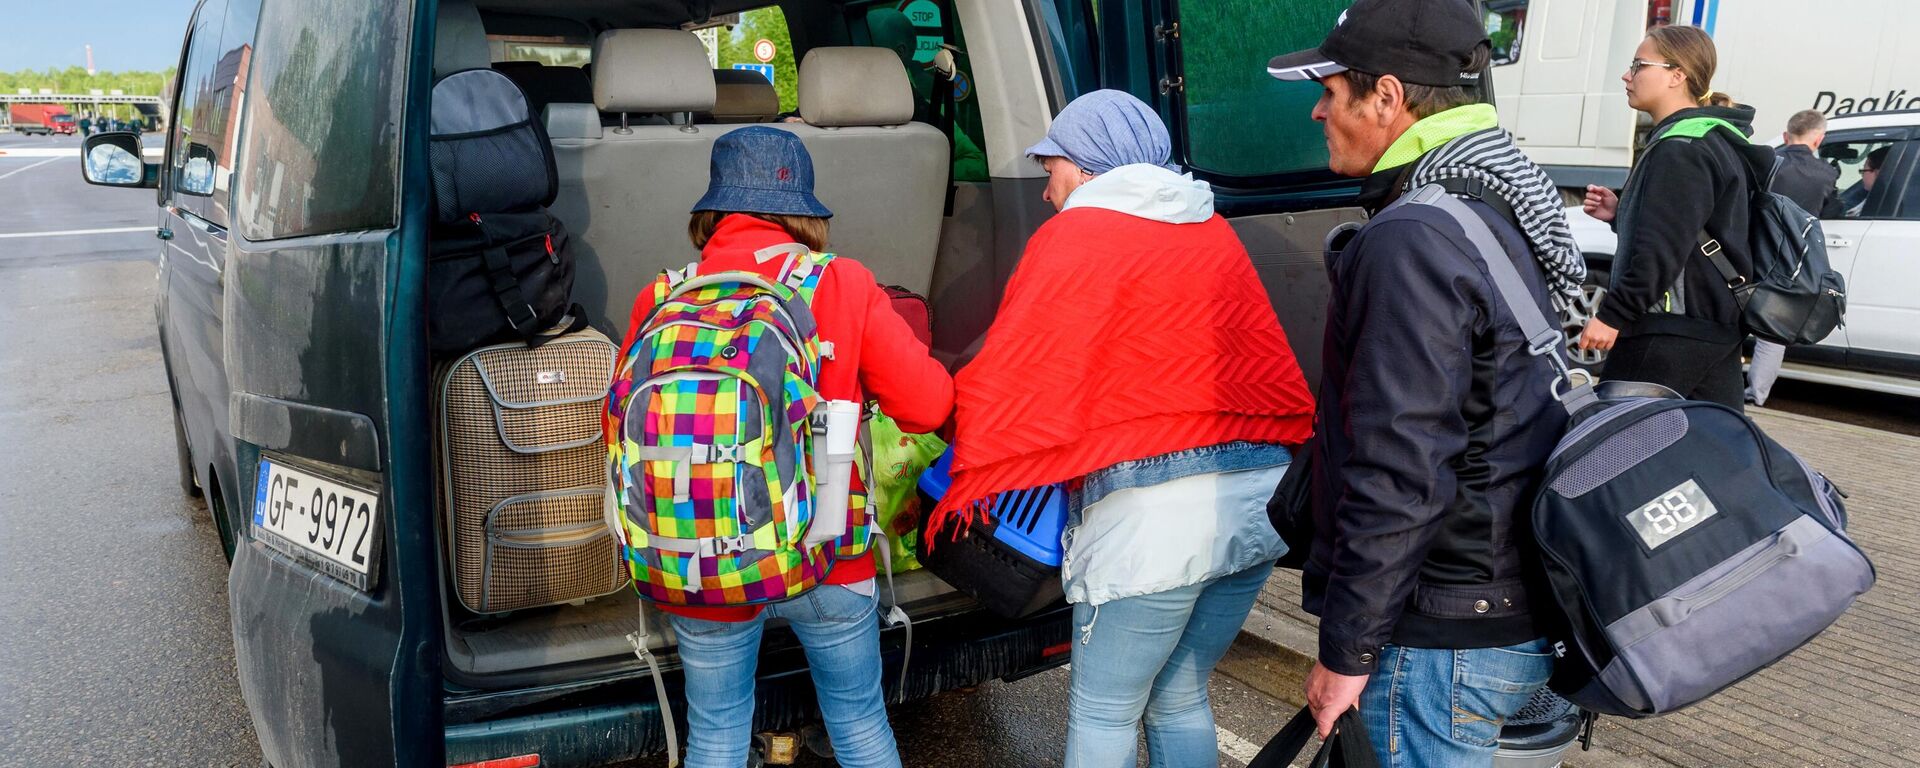 An Ukrainian refugee family puts their luggage into a van of the State Rescue Service after crossing the Russian-Latvian border at Terehova border checkpoint, in Terehova, Latvia. File photo. - Sputnik International, 1920, 14.11.2023